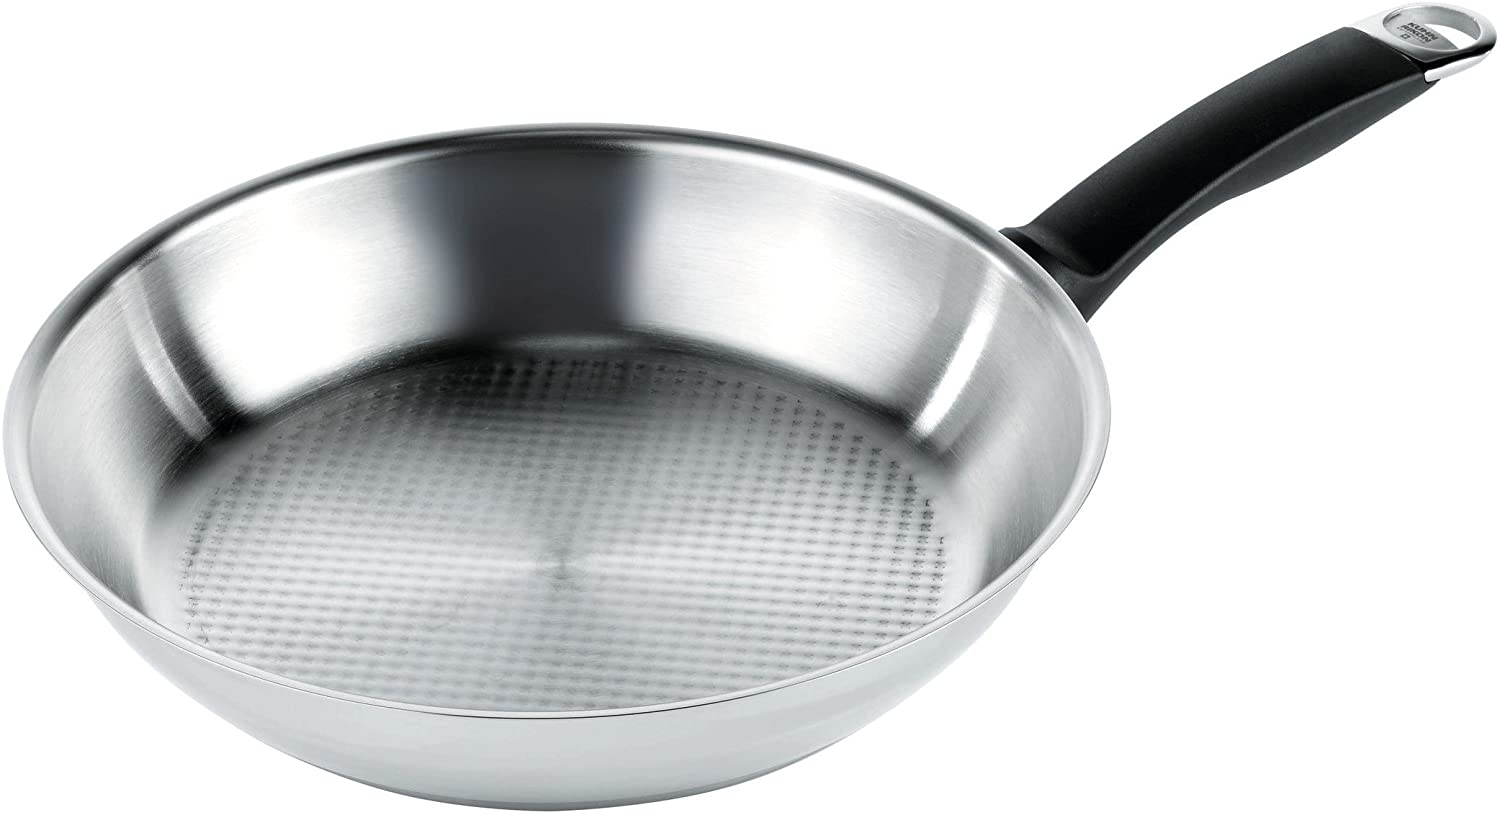 KUHN RIKON Silver Star Frying Pan Uncoated Stainless Steel with Honeycomb Base 26 cm All Heat Sources Including Induction for Crisp and Low Fat Frying